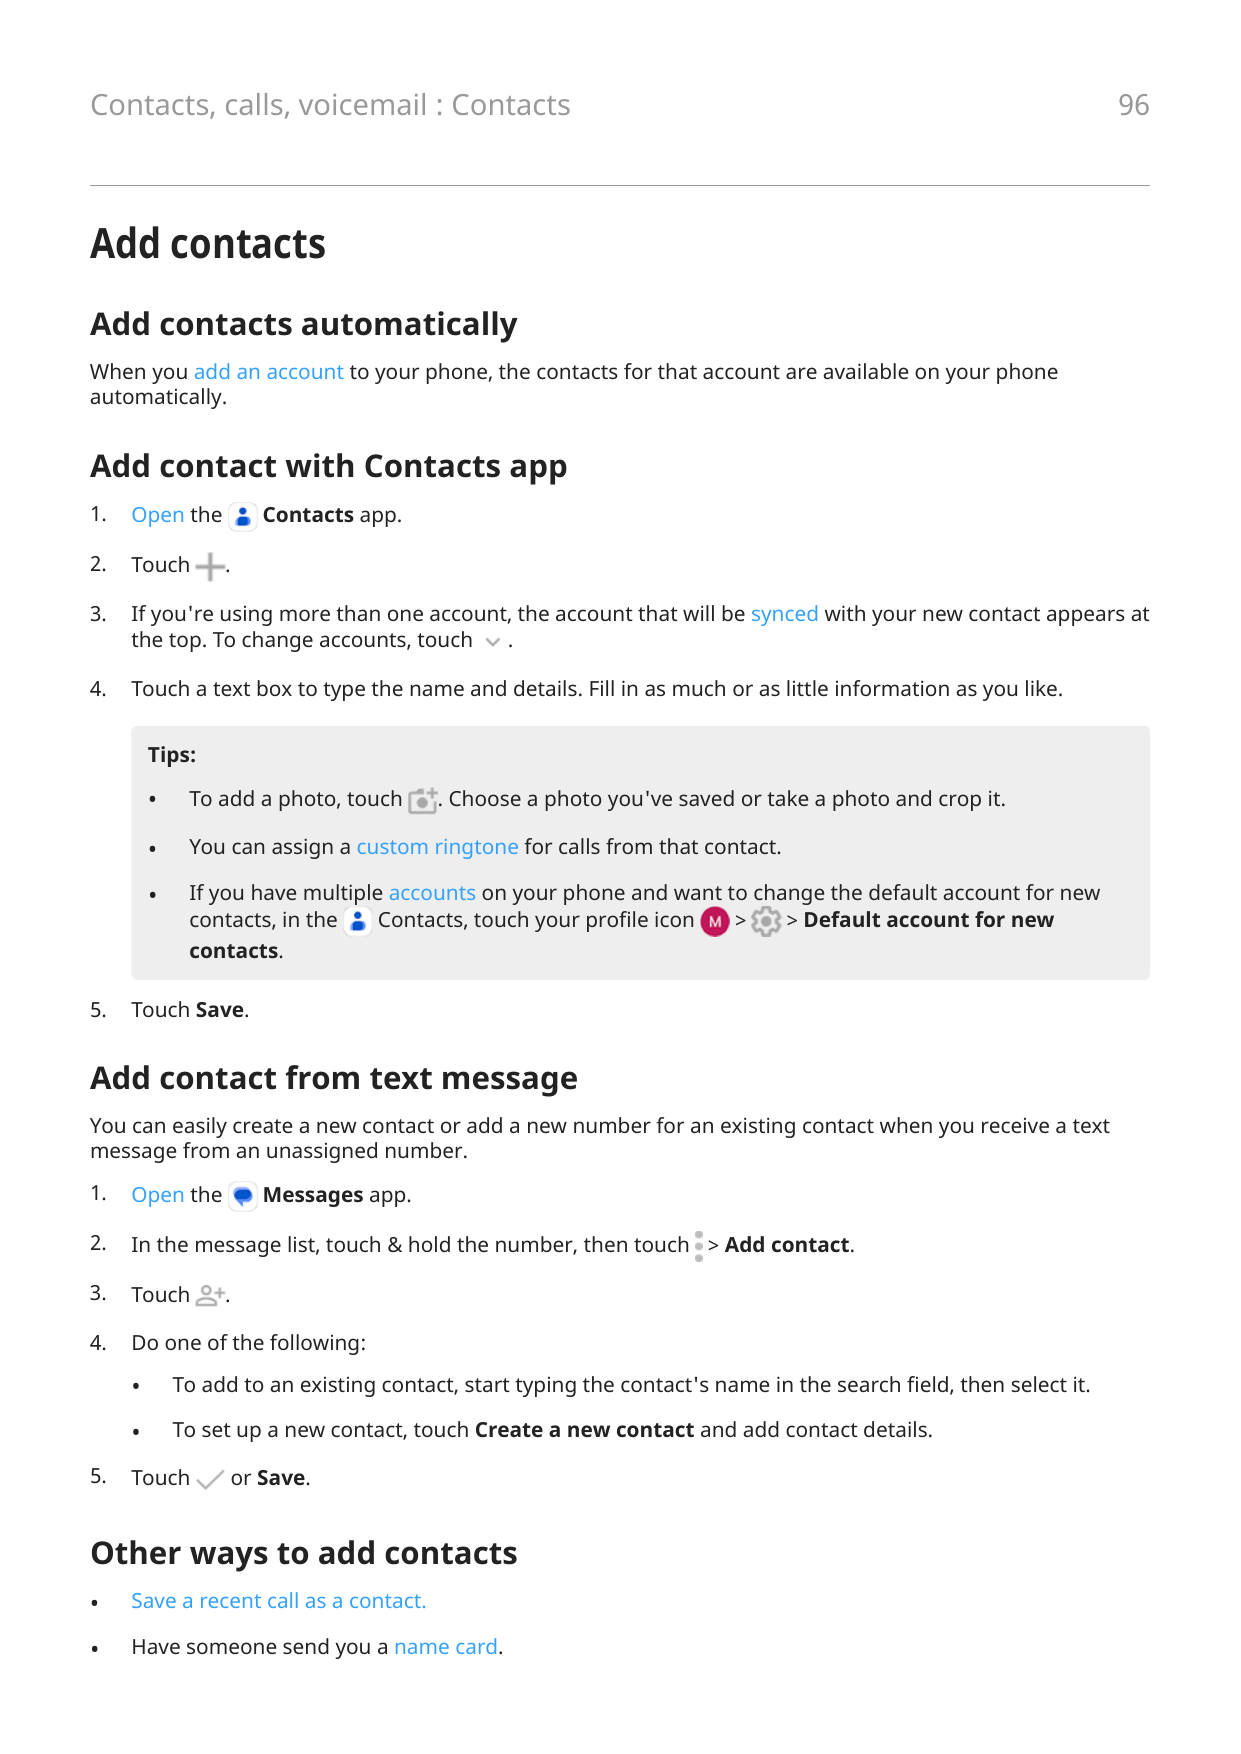 Contacts, calls, voicemail : Contacts96Add contactsAdd contacts automaticallyWhen you add an account to your phone, the contacts